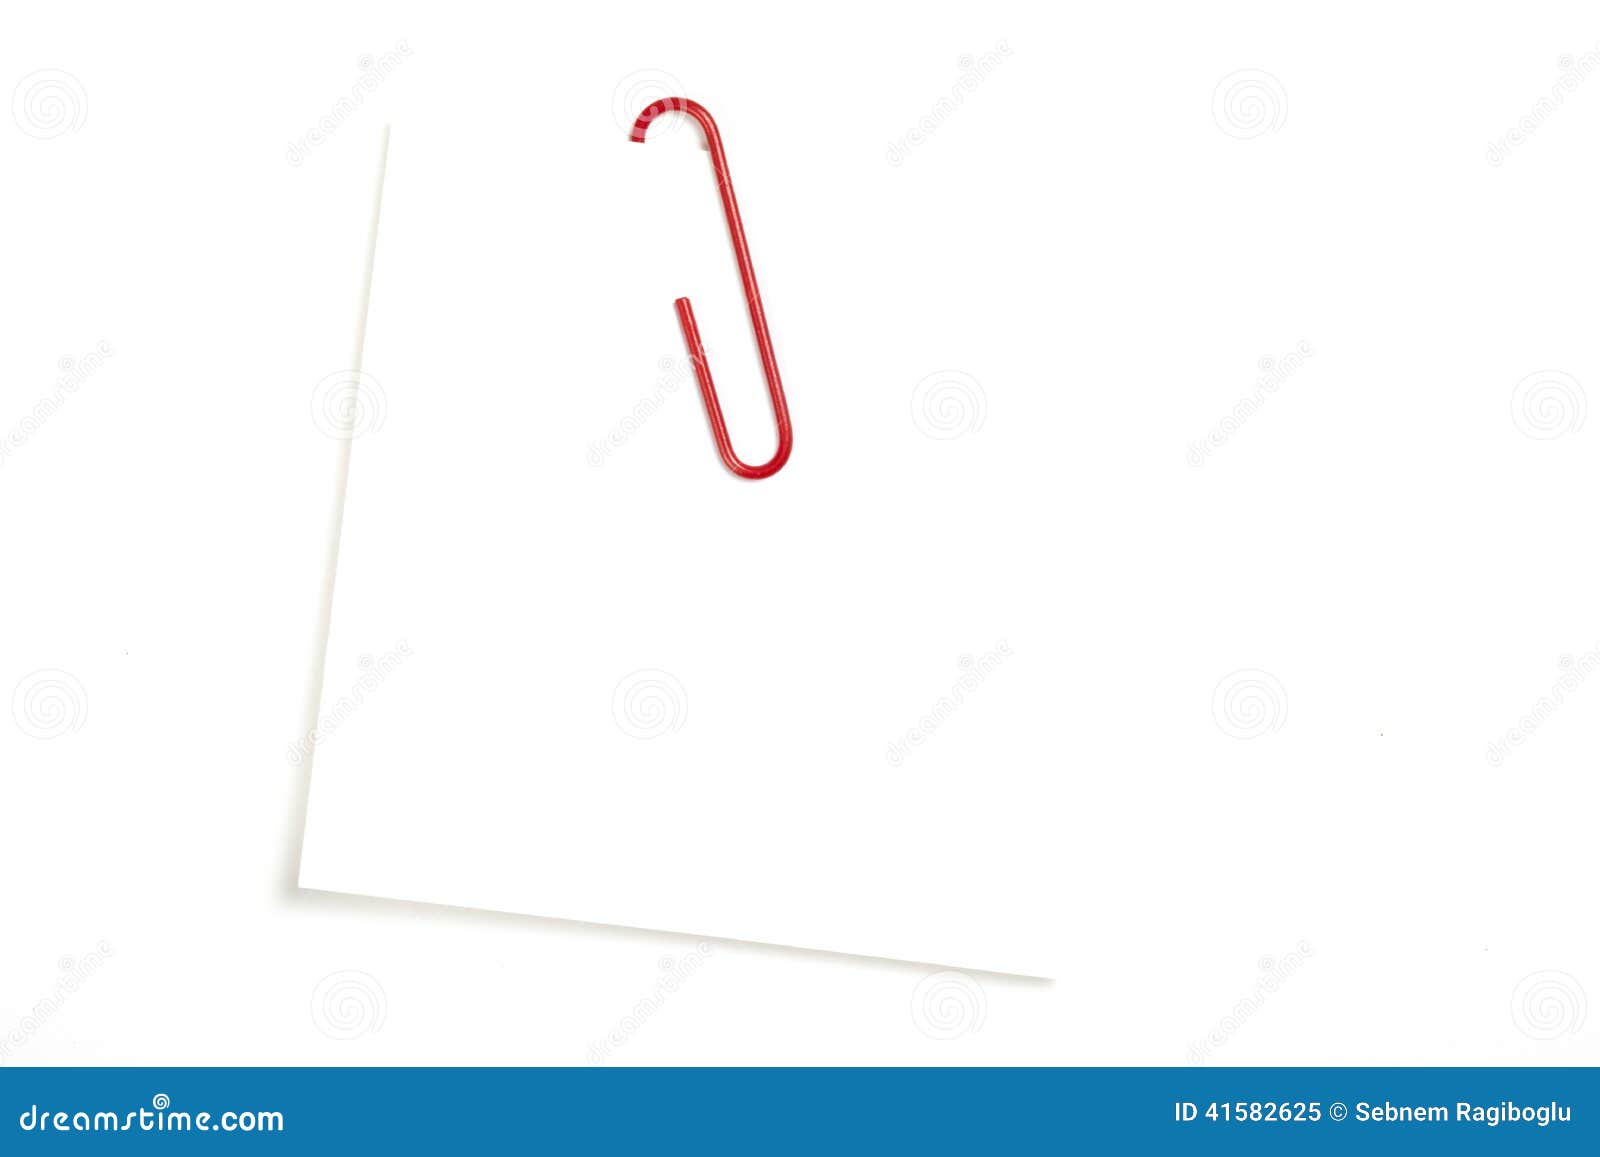 red paperclip